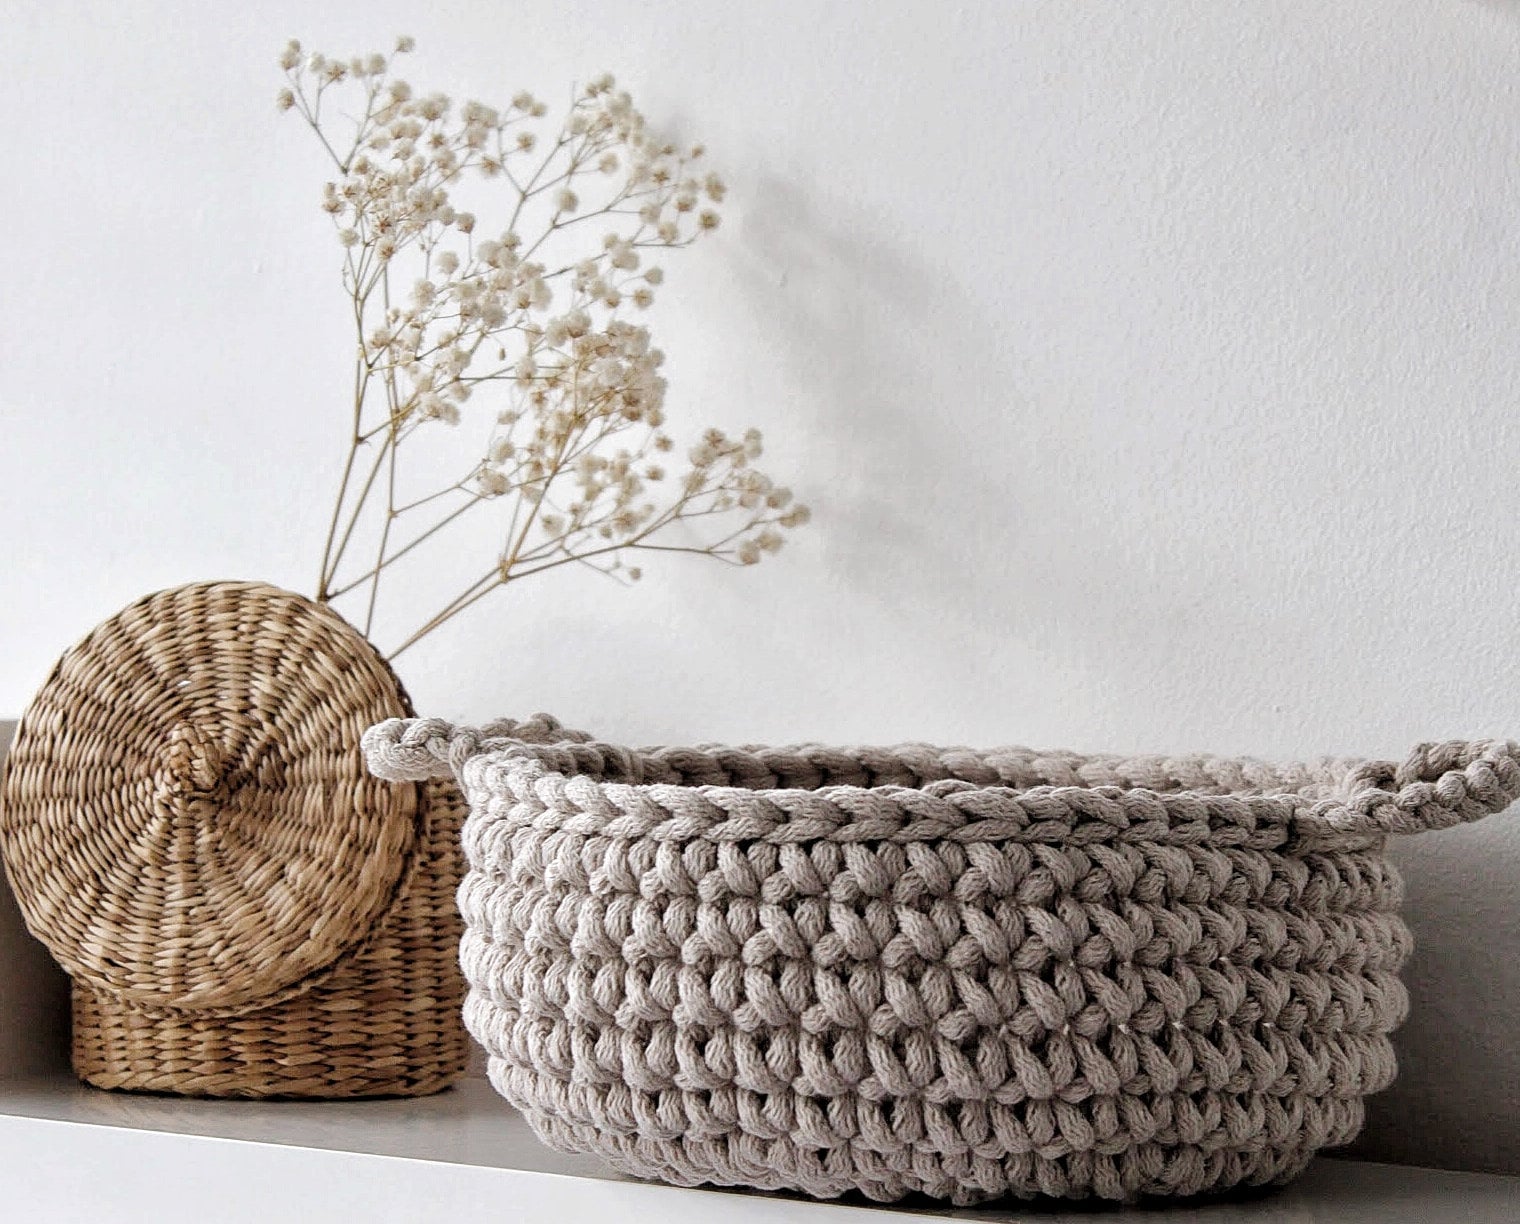 Makeup White&Brown Hombins Decorative Storage Baskets for Nursery Baby Clothes Toy Cat Dog Toy Basket Small Round Storage Baskets Set of 3 Woven Basket for Organization 